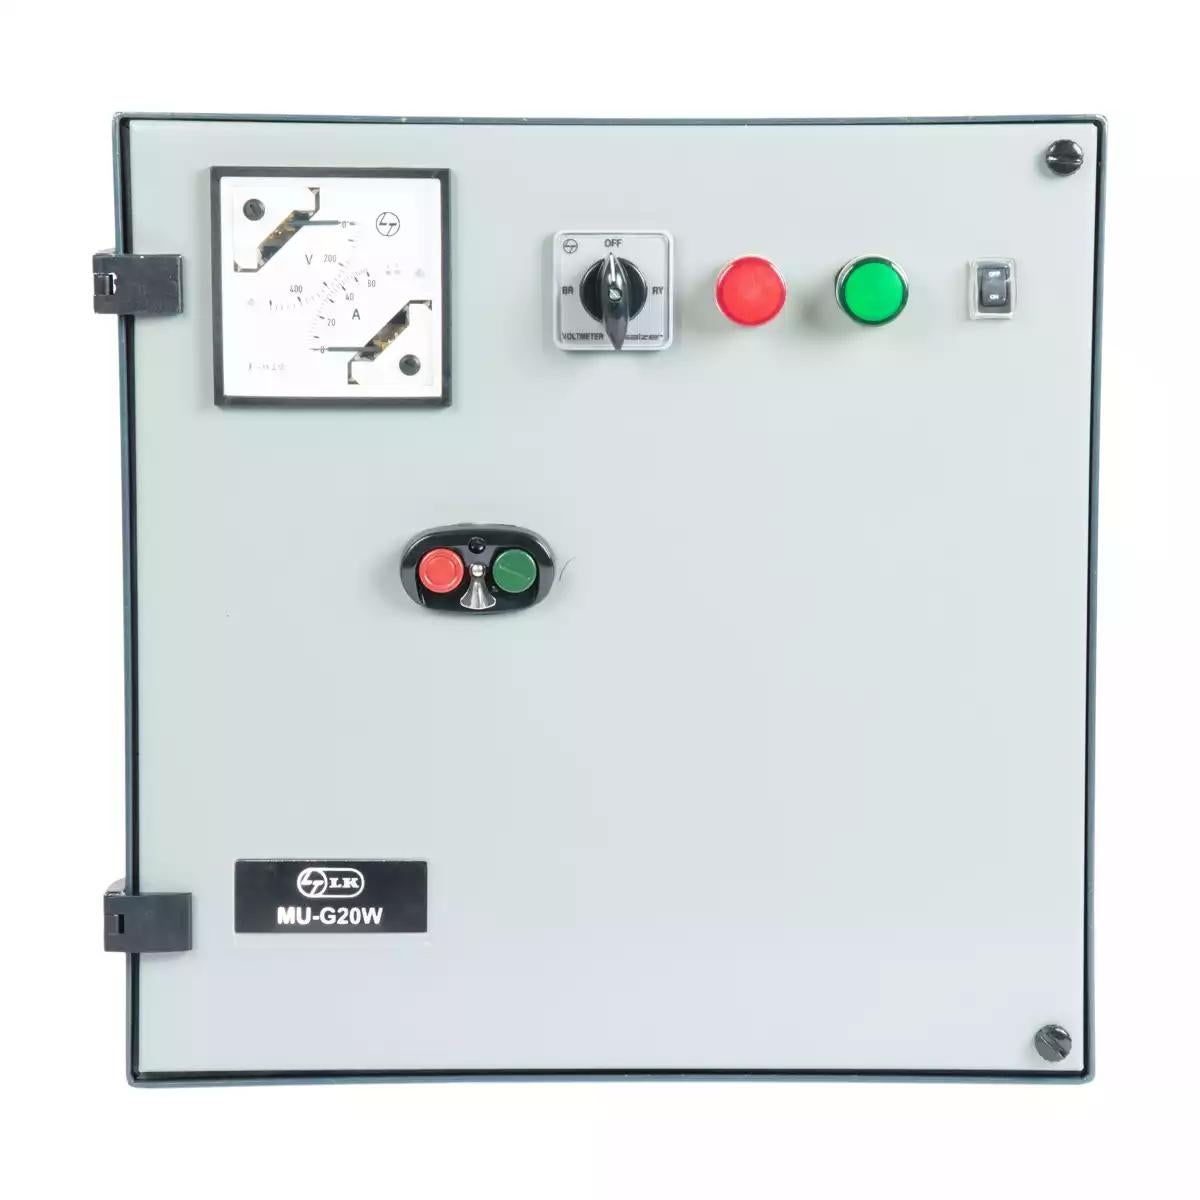 Three Phase Fully Automatic Star Delta Controller with WLC for Submersible Pump Application,MU-G20W,20HP,FASD (CS91038DOCO)